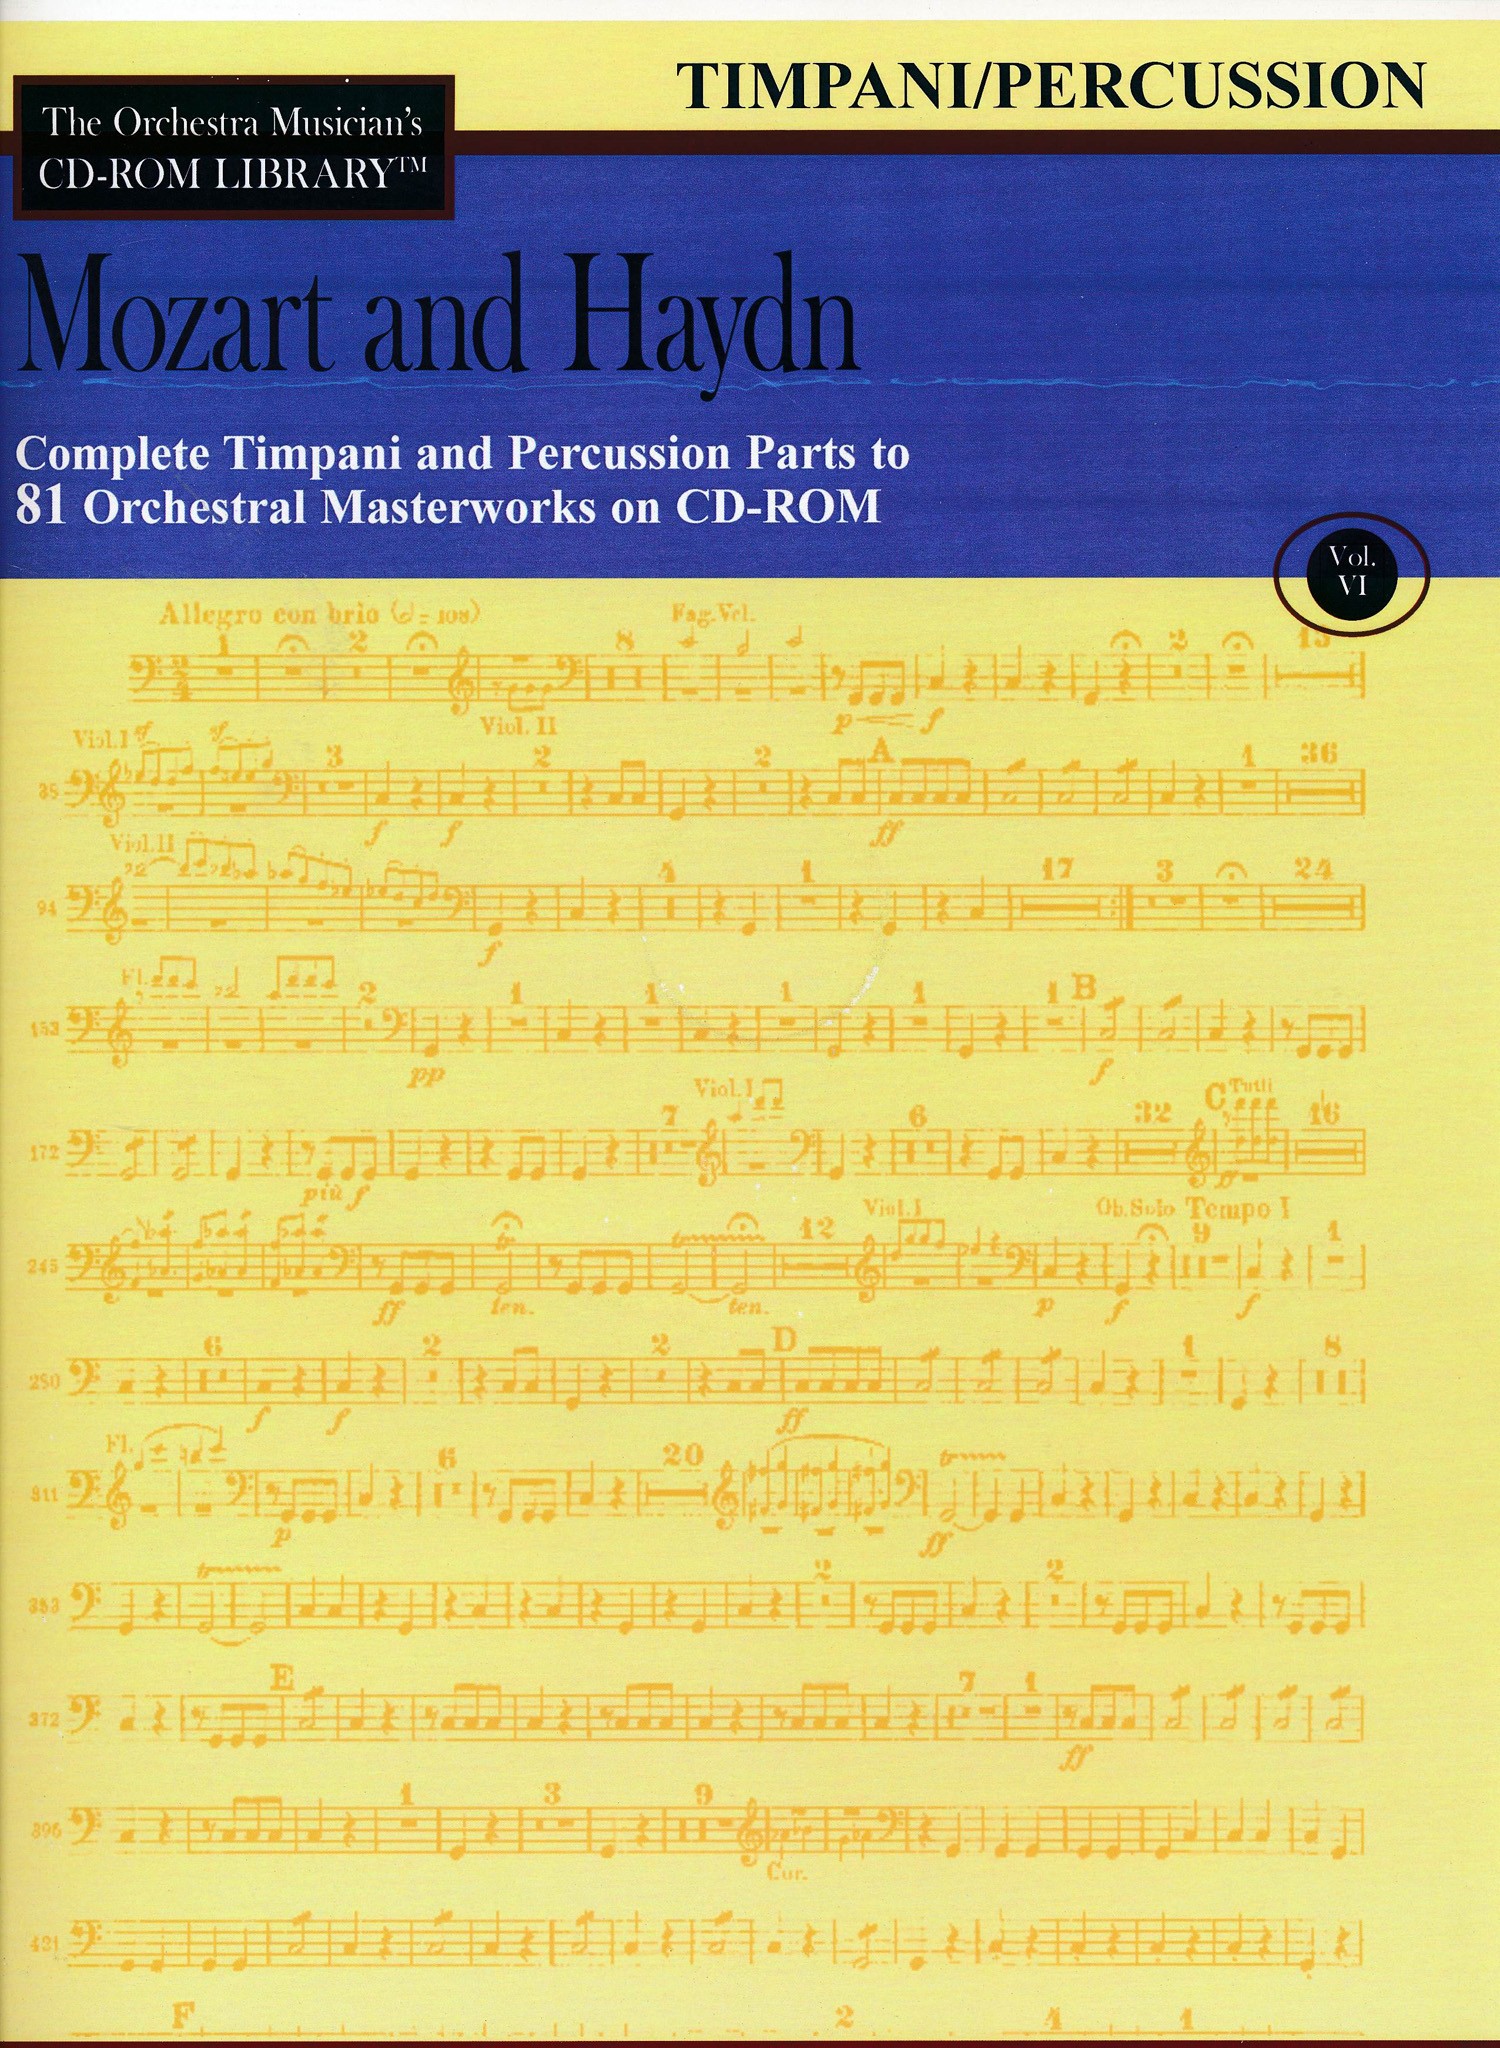 Mozart and Haydn - Volume 6 (CD Library)